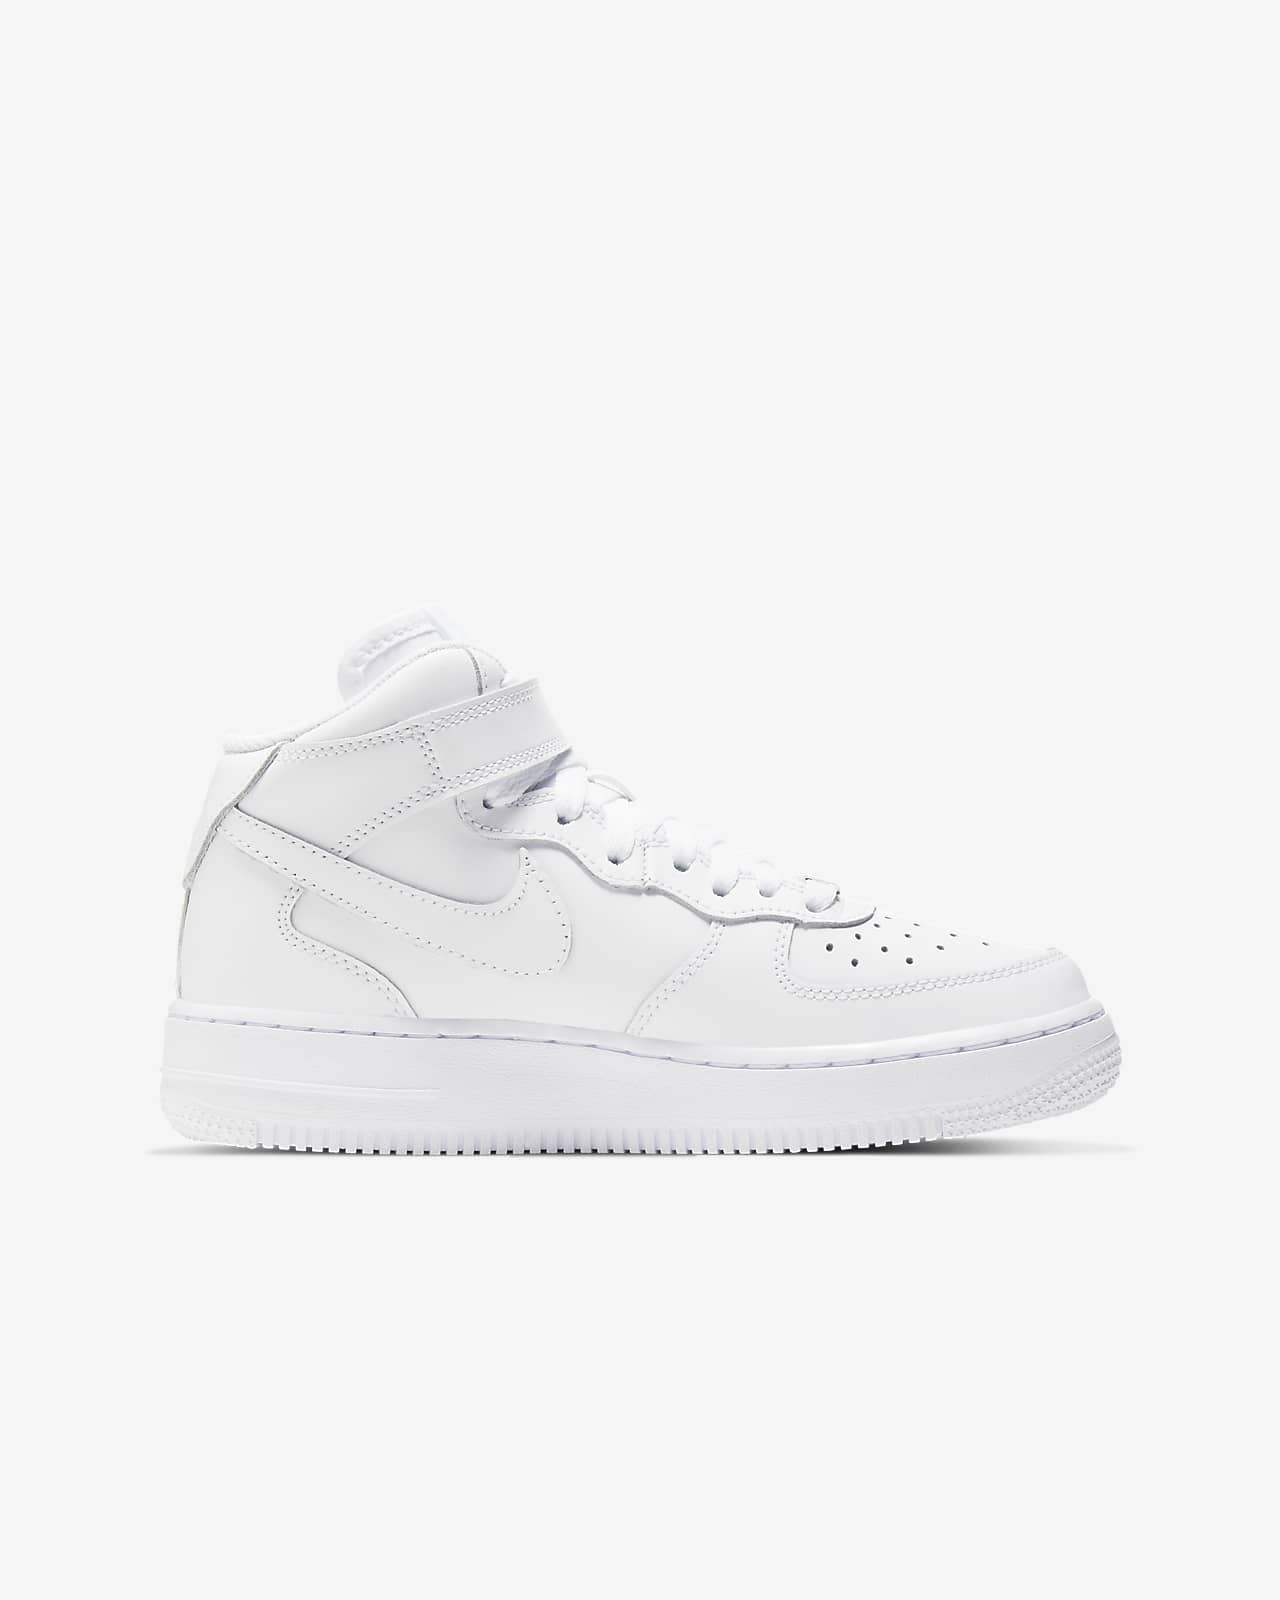 nike air force 1 mid children